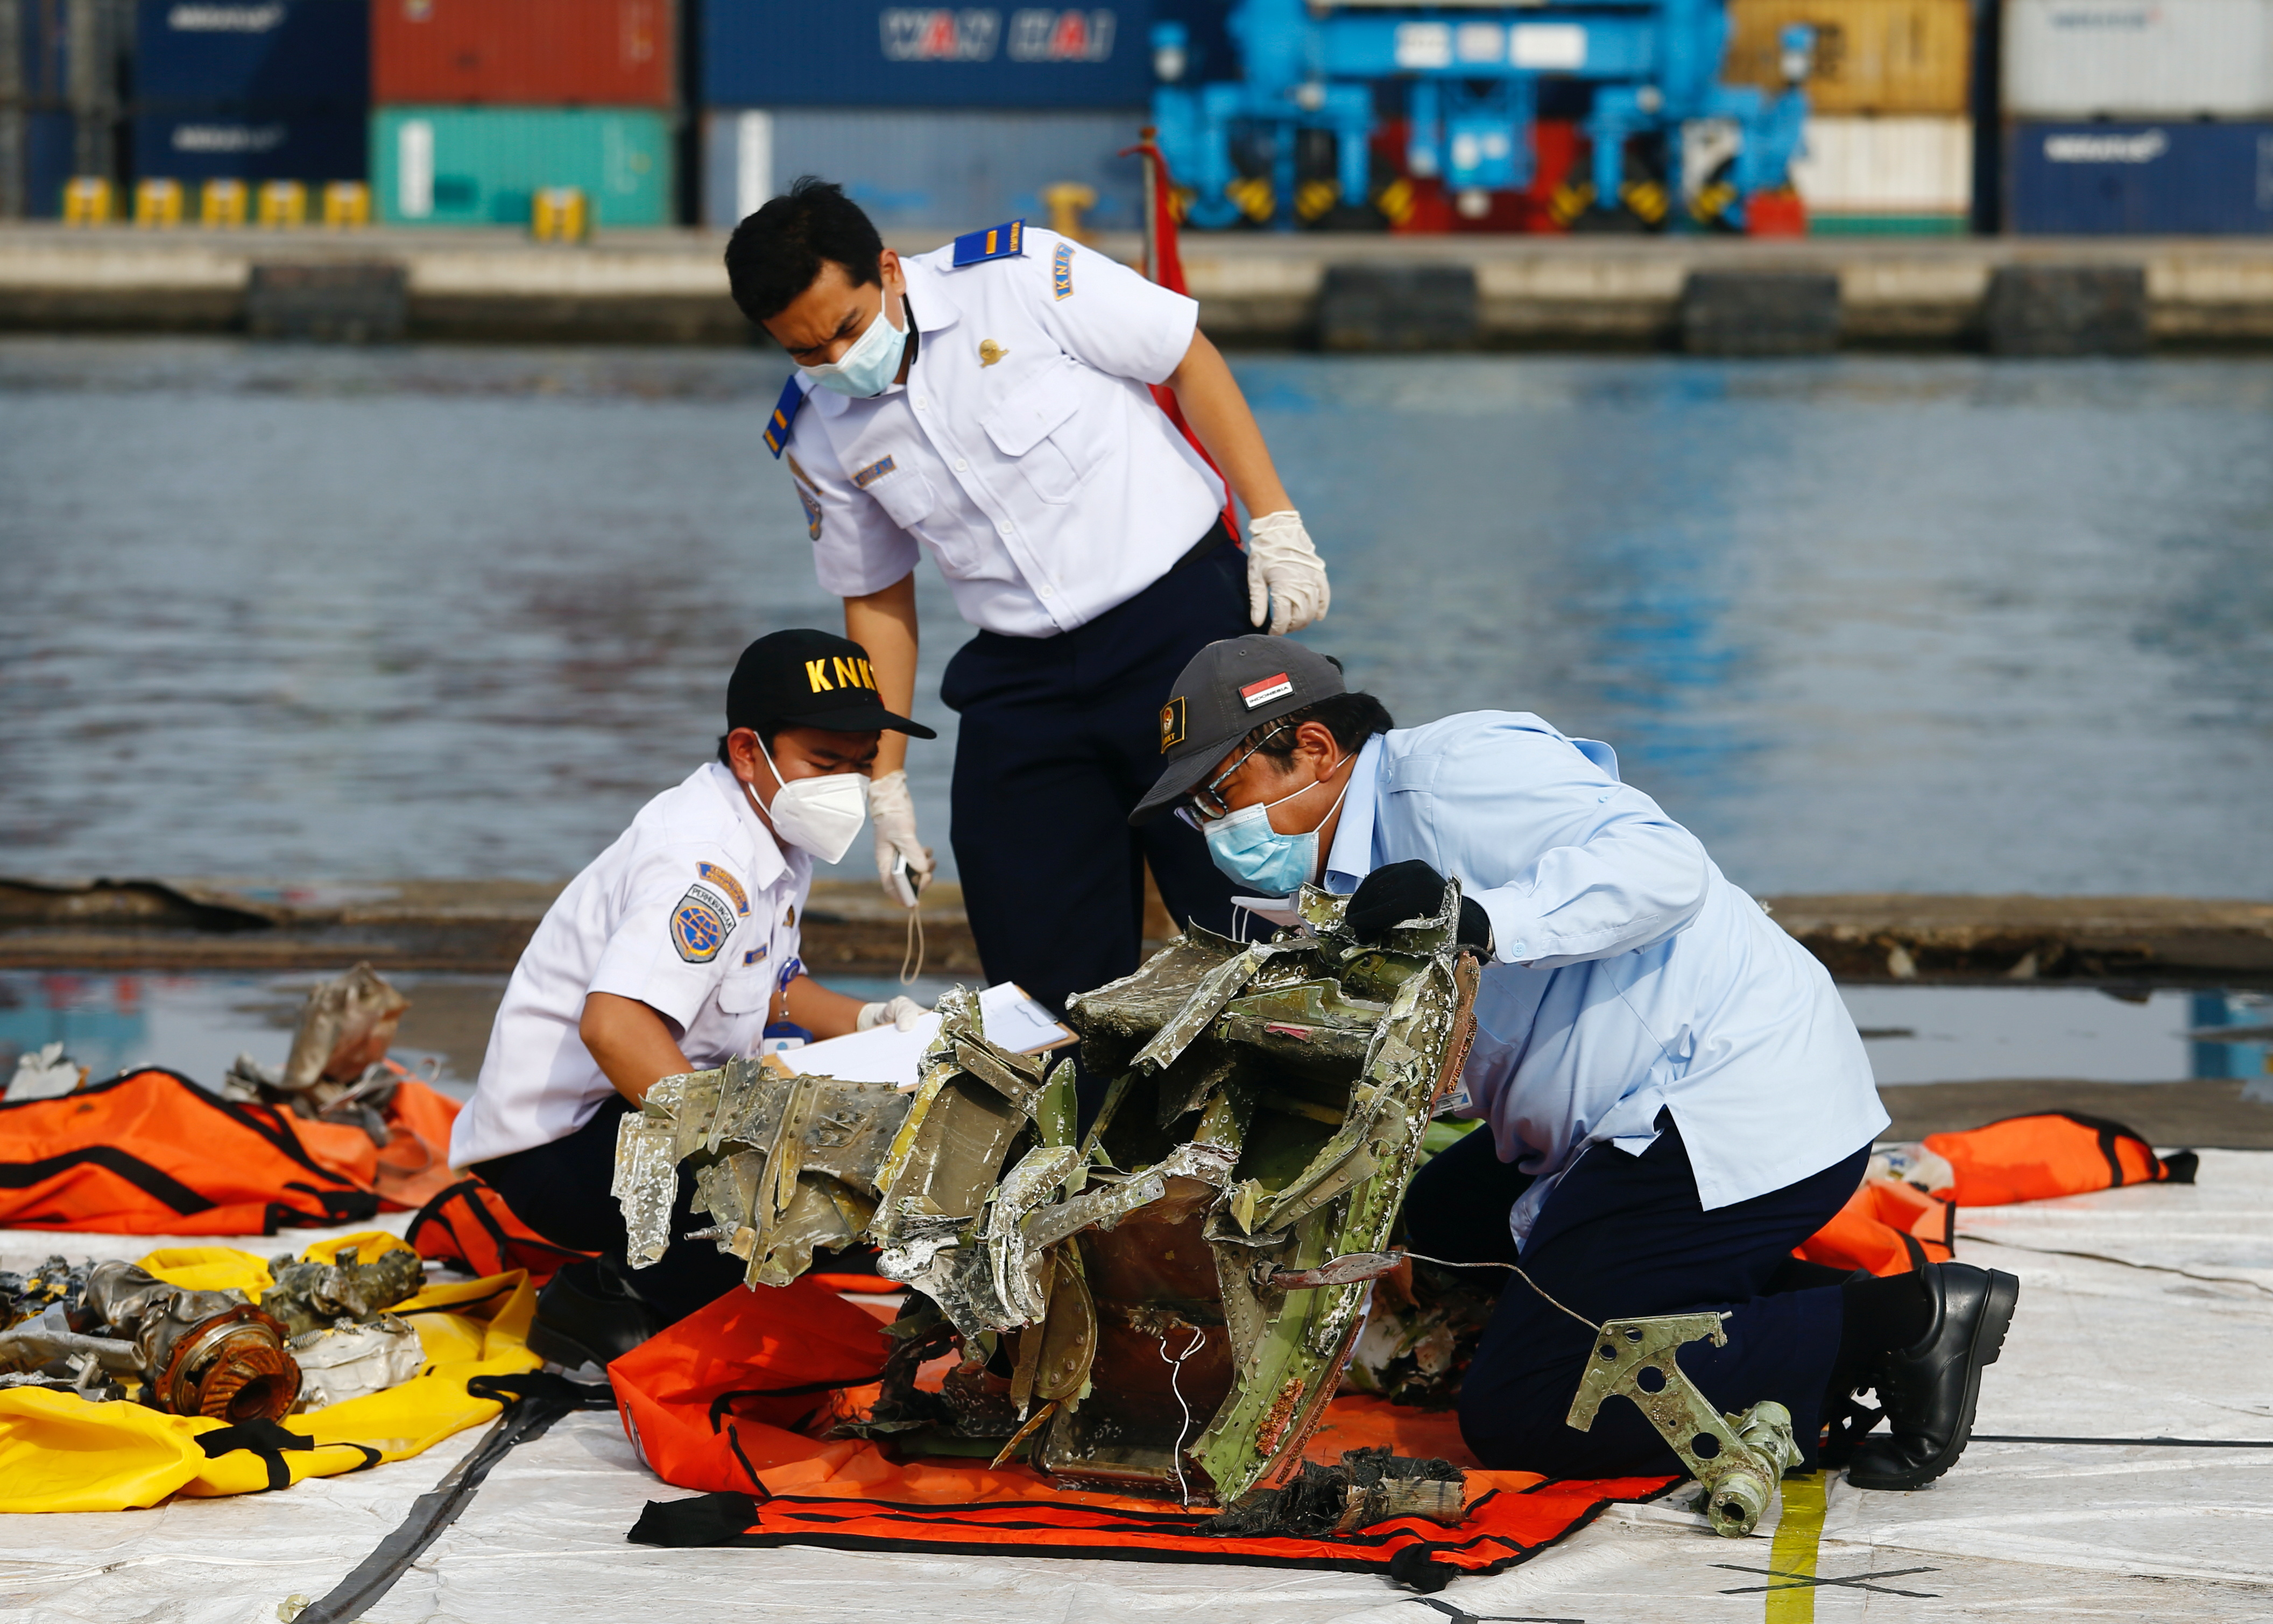 Officers of Indonesia's National Transportation Safety Committee inspect the debris of Sriwijaya Air flight SJ 182, which crashed into the Java Sea, on the last day of its search and rescue operation, at Tanjung Priok port in Jakarta